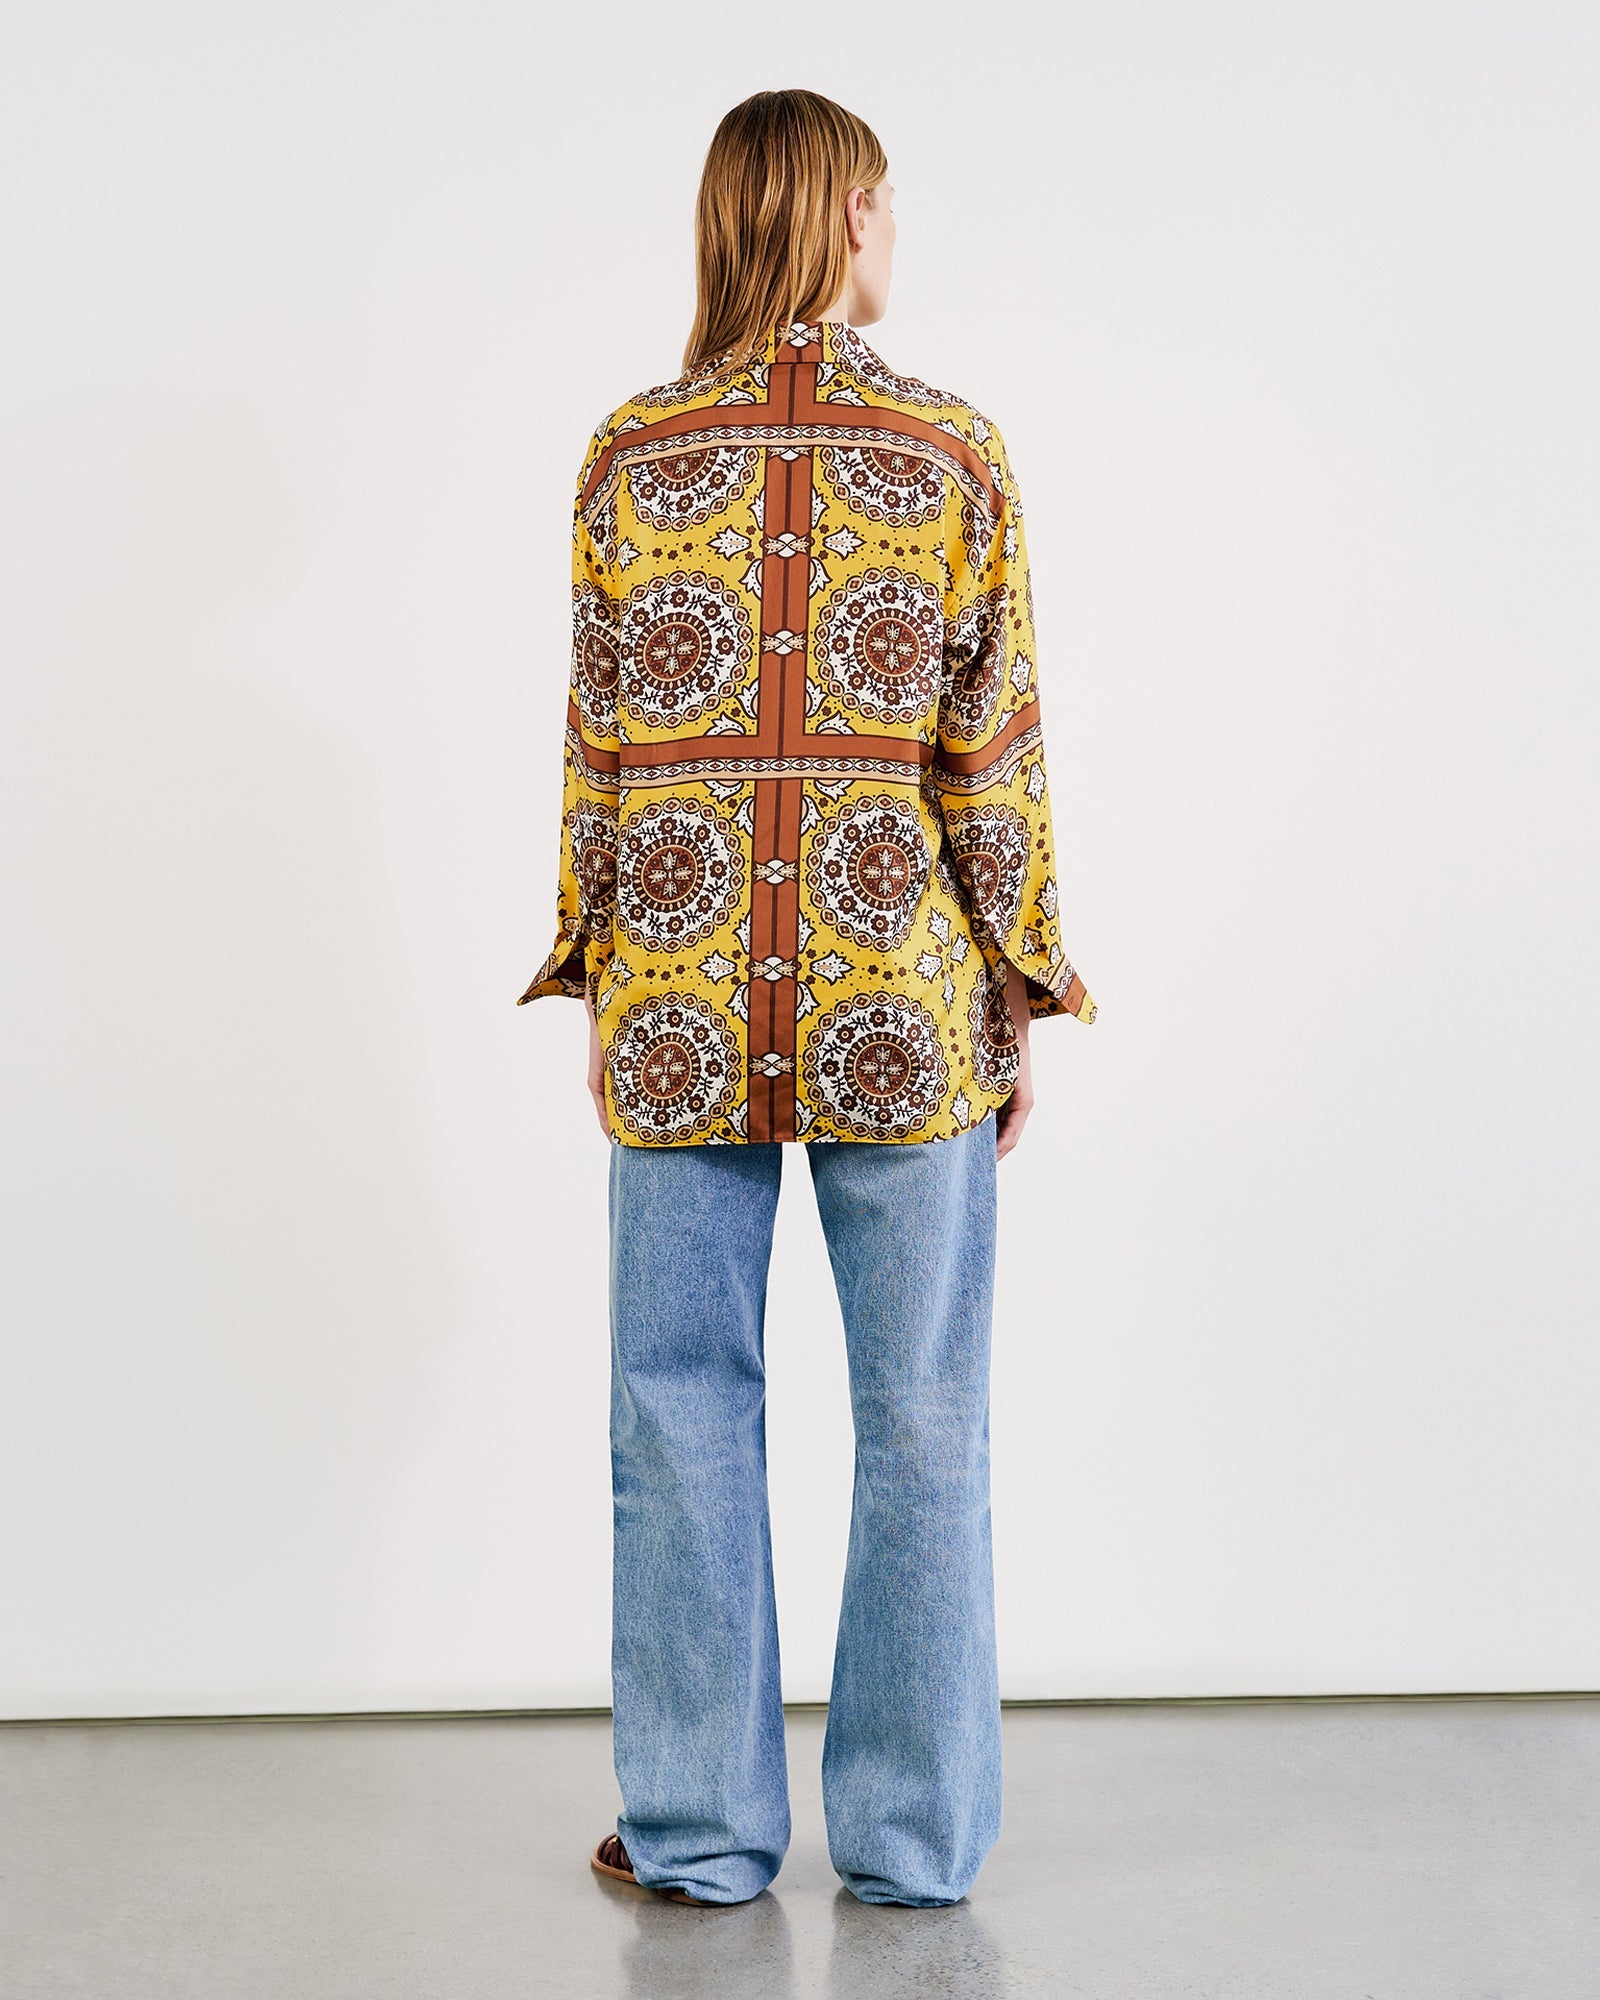 Nili Lotan Julien Shirt in Scarf Print Yellow available at TNT The New Trend Australia.